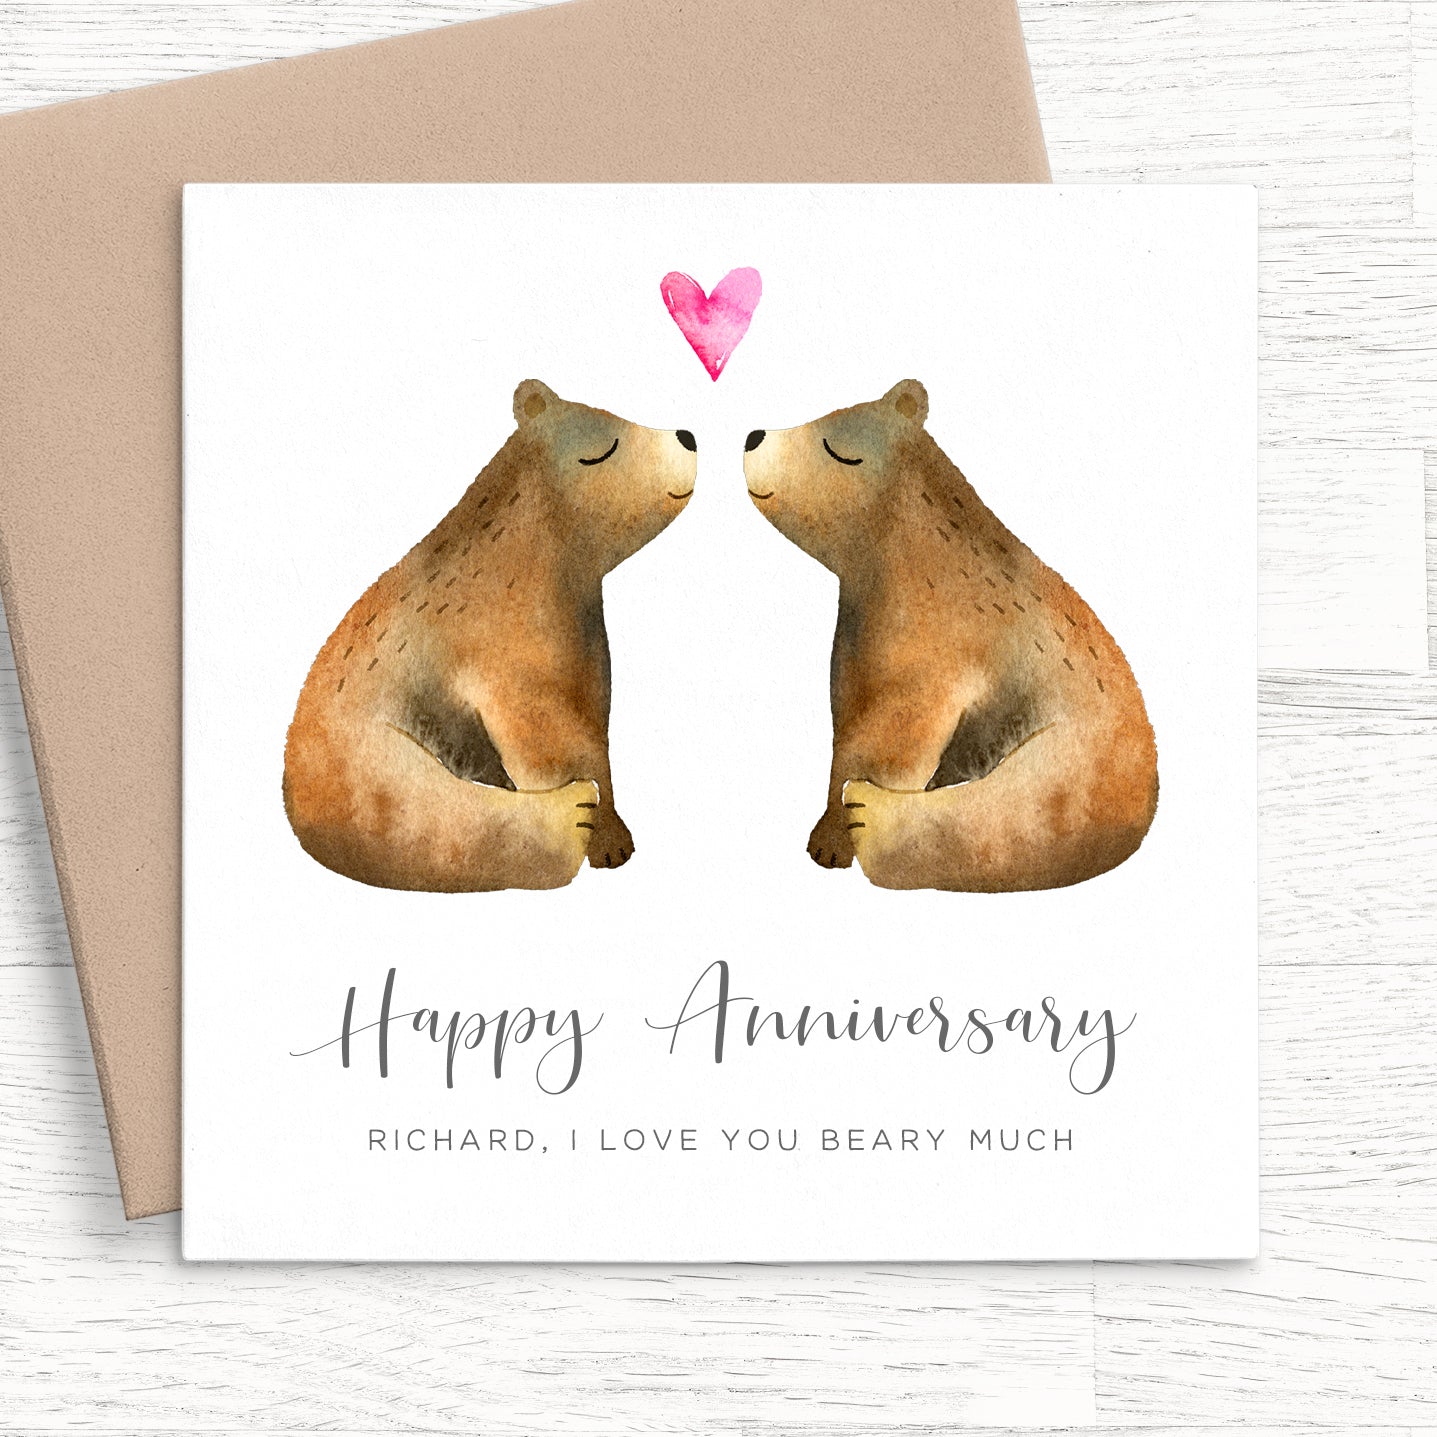 Personalised Anniversary Cards for Husbands, Cute Bear Design